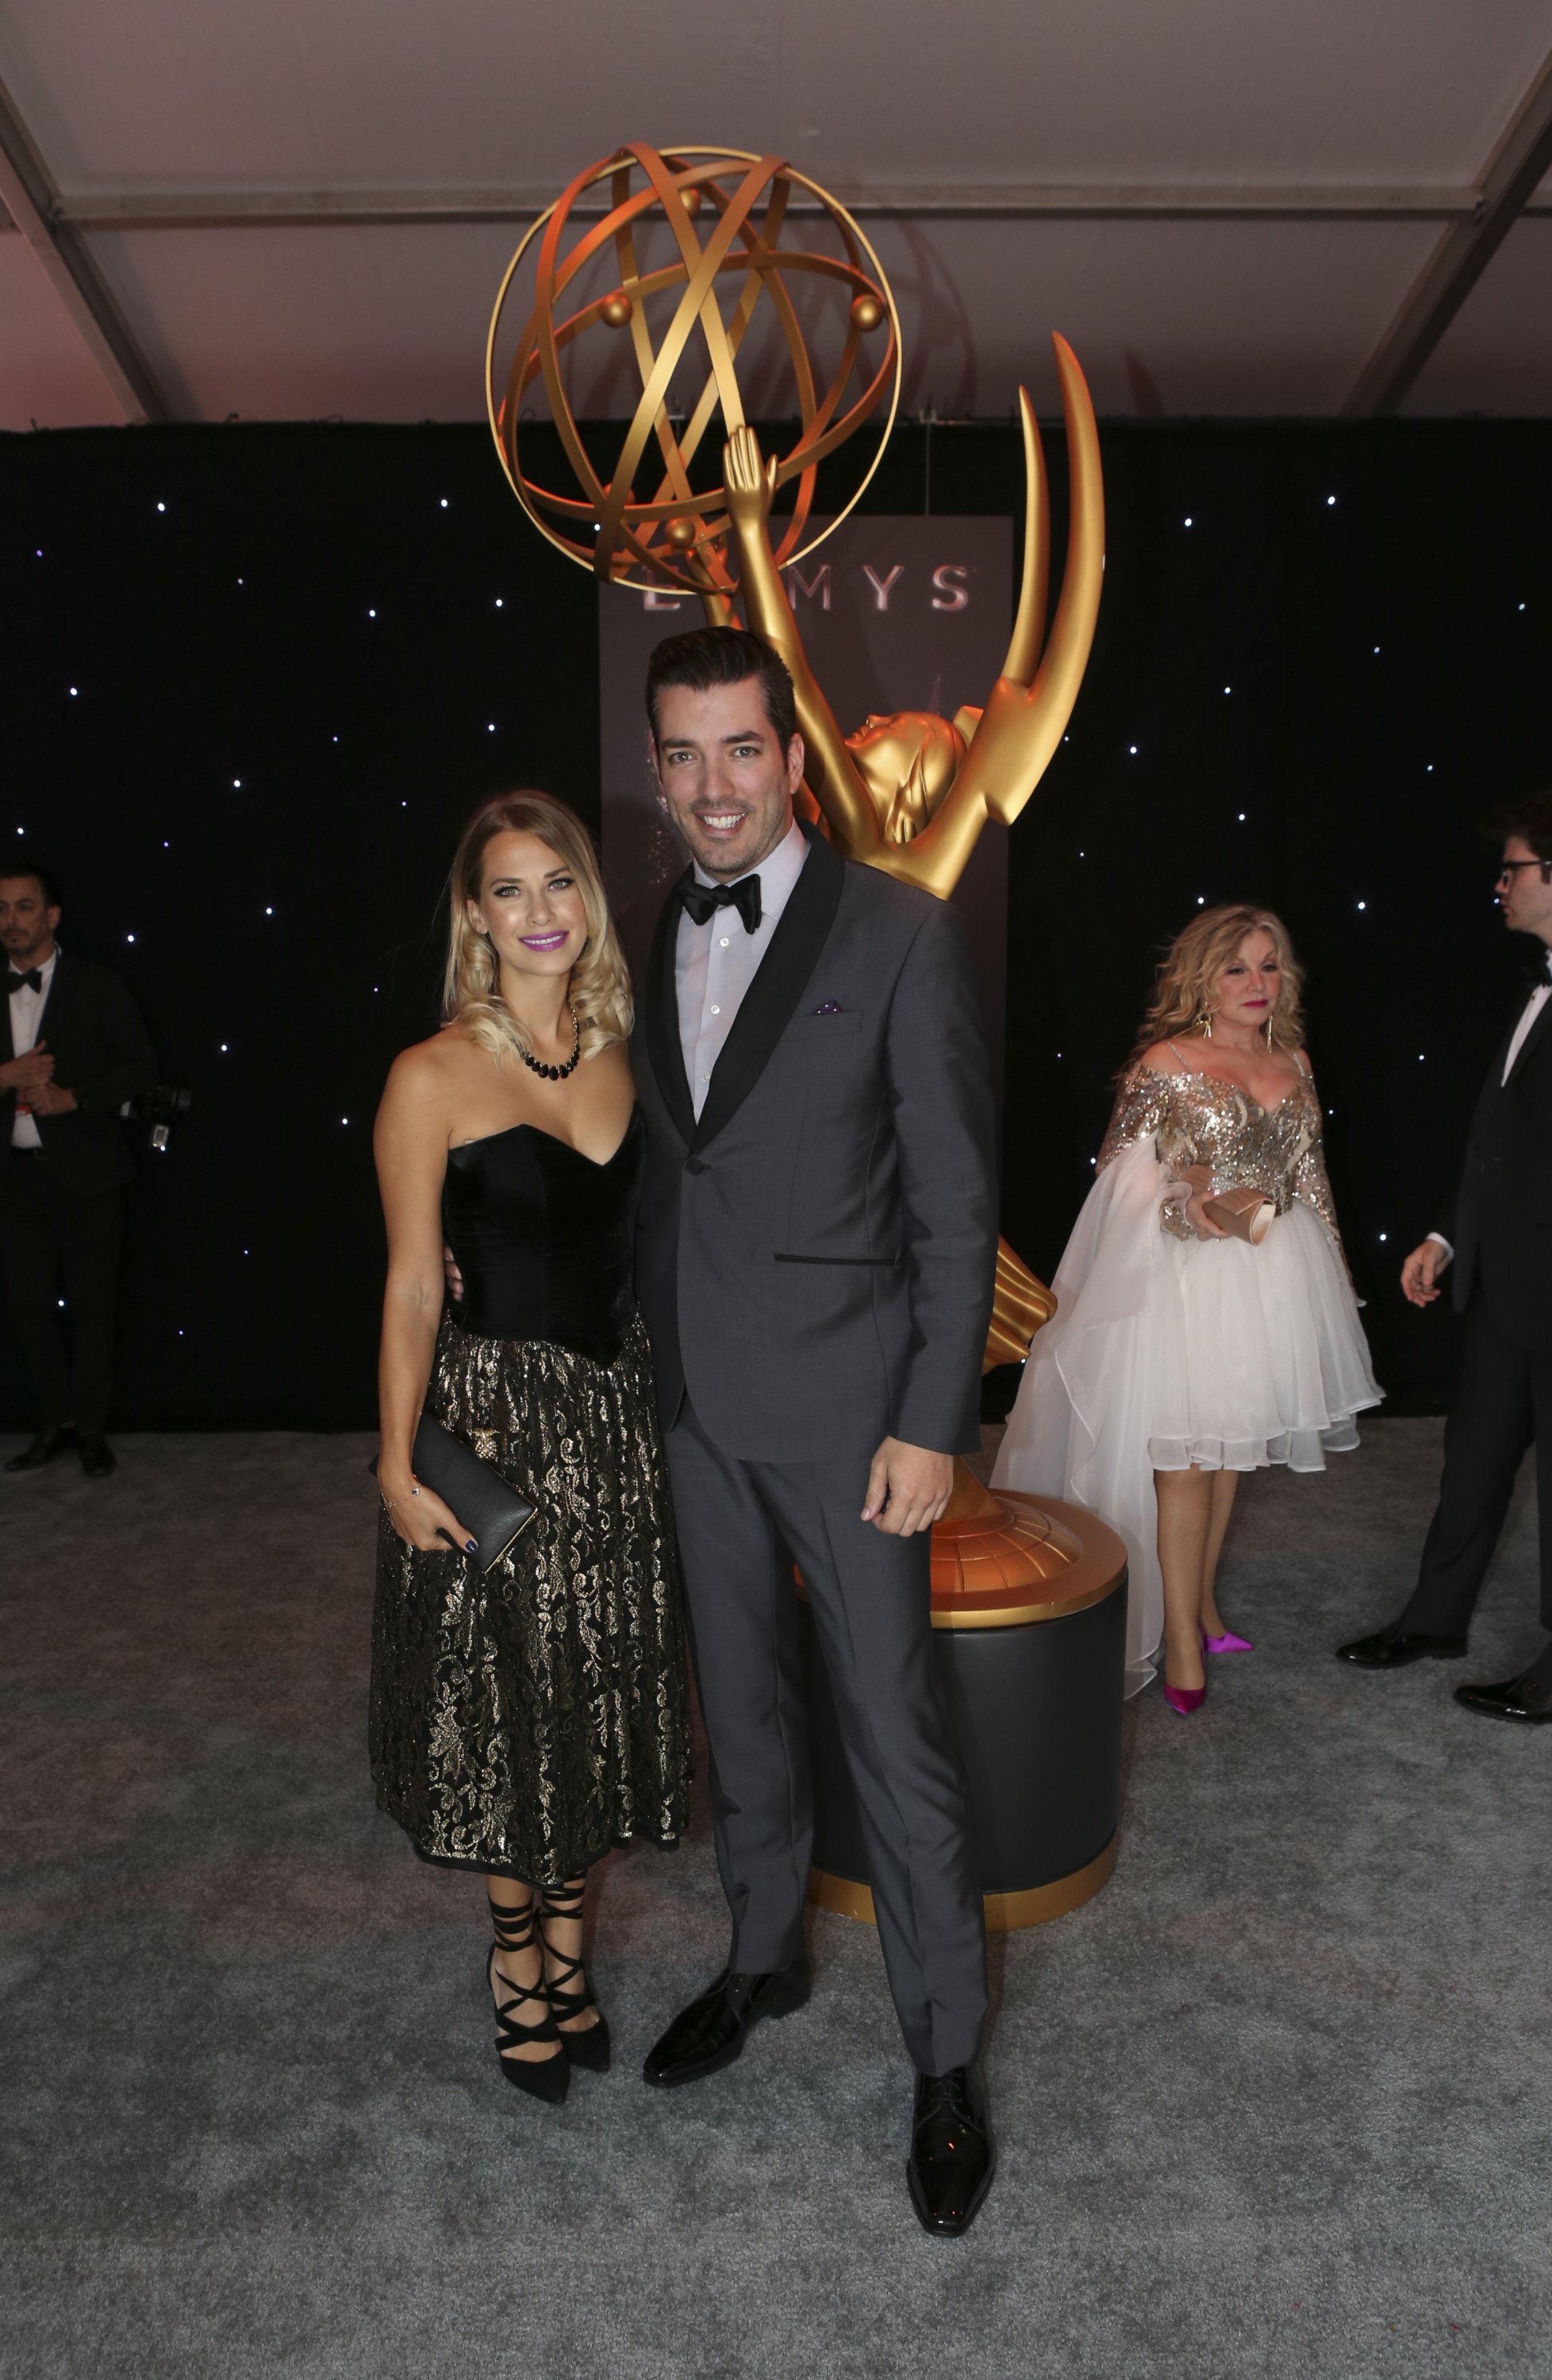 Jonathan Scott and Jacinta Kuznetsov arrive on the red carpet at the 69th Primetime Emmy Awards, Live from the Microsoft Theater in Los Angeles Sunday, September 17 2017 | Source: Getty Images